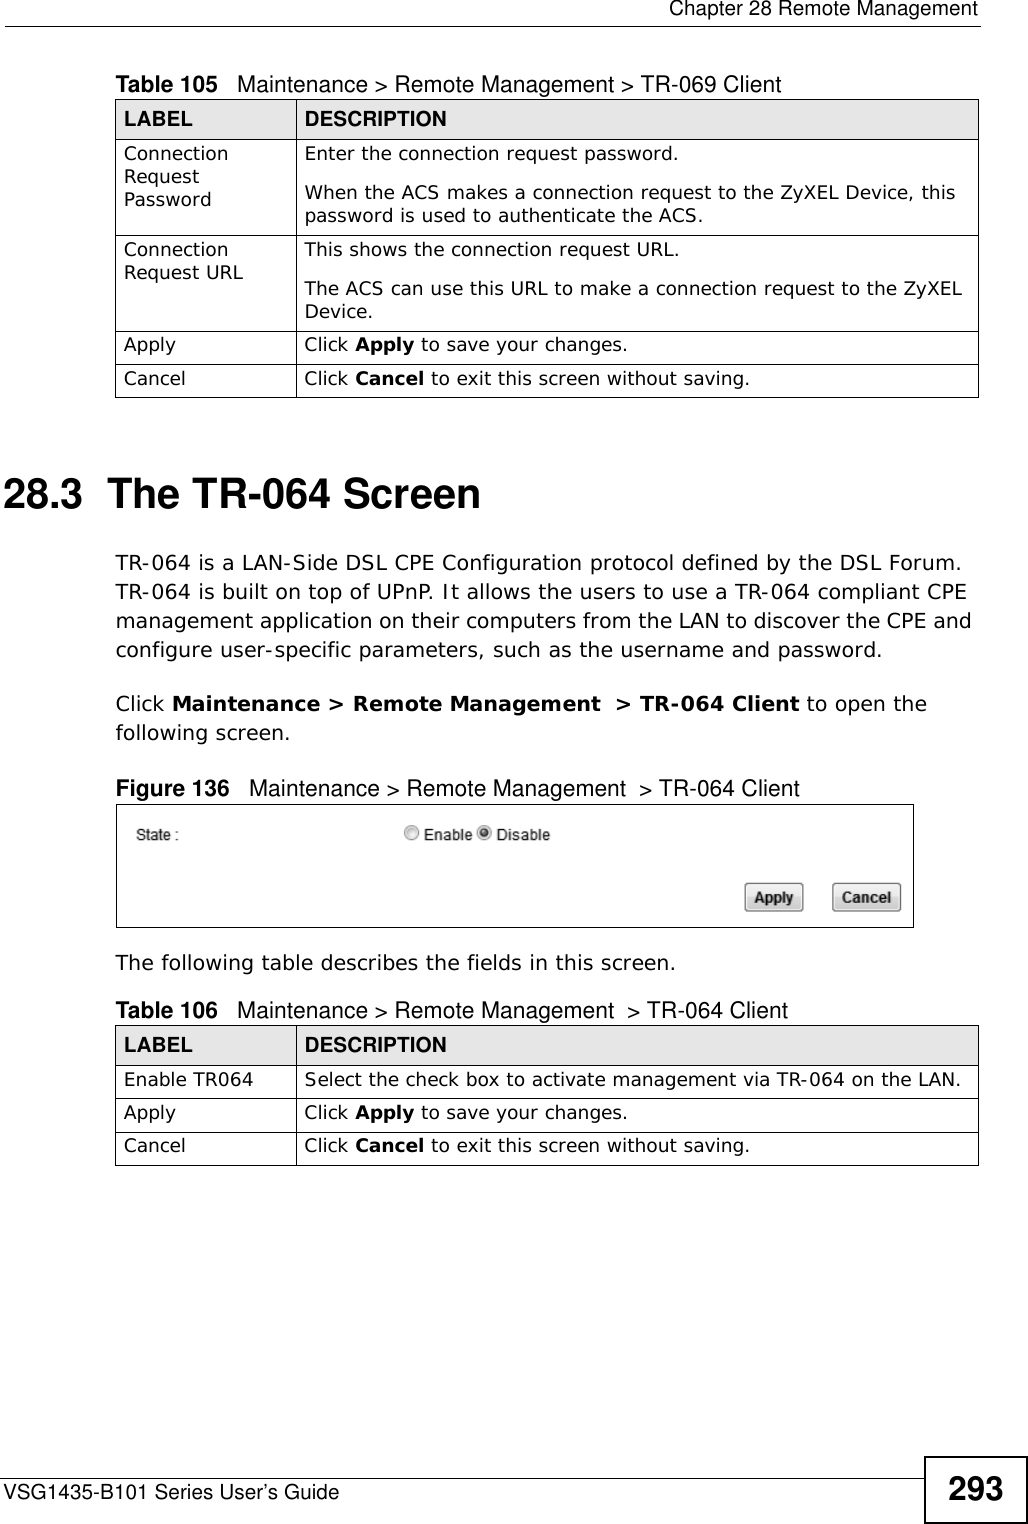  Chapter 28 Remote ManagementVSG1435-B101 Series User’s Guide 29328.3  The TR-064 ScreenTR-064 is a LAN-Side DSL CPE Configuration protocol defined by the DSL Forum. TR-064 is built on top of UPnP. It allows the users to use a TR-064 compliant CPE management application on their computers from the LAN to discover the CPE and configure user-specific parameters, such as the username and password.Click Maintenance &gt; Remote Management  &gt; TR-064 Client to open the following screen.  Figure 136   Maintenance &gt; Remote Management  &gt; TR-064 Client The following table describes the fields in this screen. Connection Request PasswordEnter the connection request password.When the ACS makes a connection request to the ZyXEL Device, this password is used to authenticate the ACS.Connection Request URL This shows the connection request URL.The ACS can use this URL to make a connection request to the ZyXEL Device.Apply Click Apply to save your changes.Cancel Click Cancel to exit this screen without saving.Table 105   Maintenance &gt; Remote Management &gt; TR-069 ClientLABEL DESCRIPTIONTable 106   Maintenance &gt; Remote Management  &gt; TR-064 ClientLABEL DESCRIPTIONEnable TR064 Select the check box to activate management via TR-064 on the LAN.Apply Click Apply to save your changes.Cancel Click Cancel to exit this screen without saving.